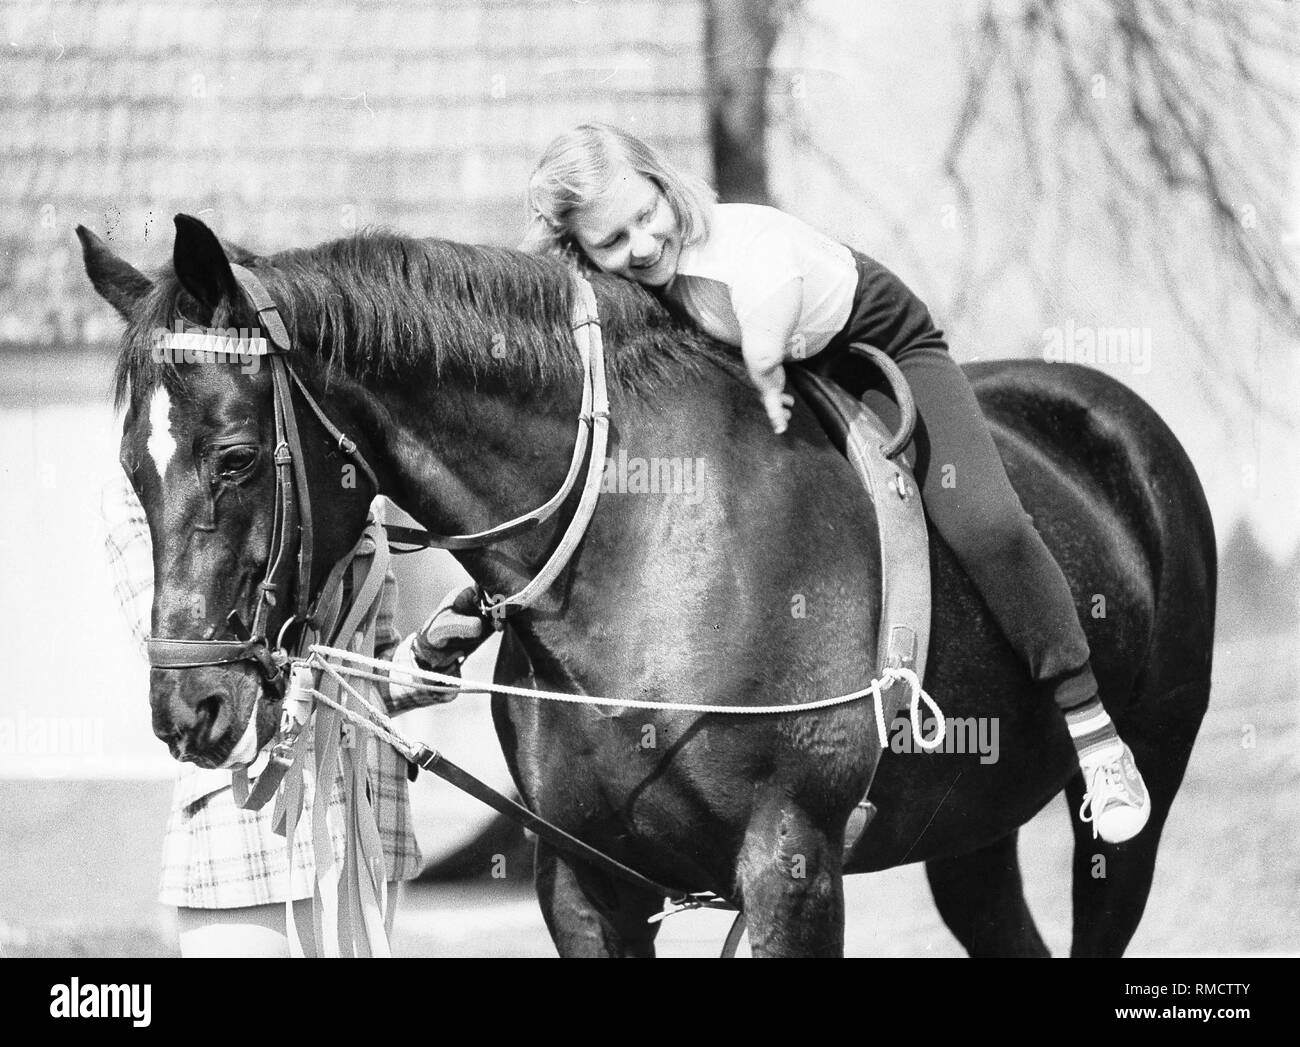 Angelika, a girl injured by Contergang, while riding. Stock Photo